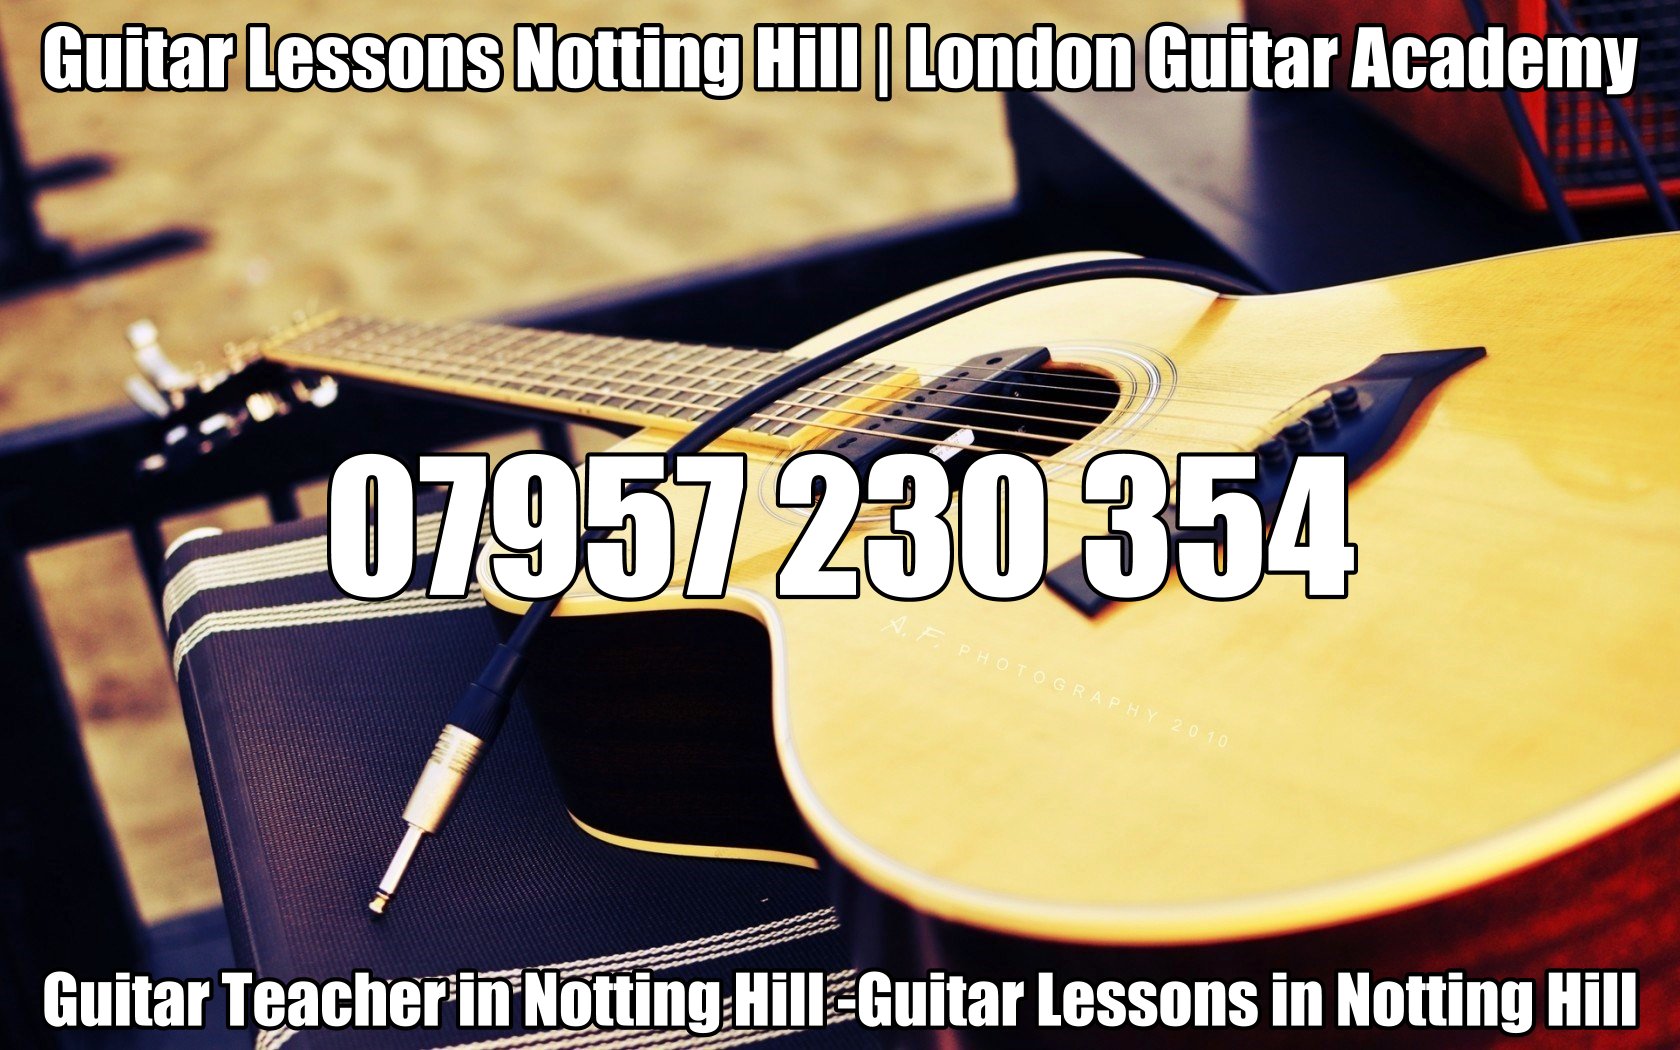 Guitar Lessons Notting Hill - London Guitar Academy